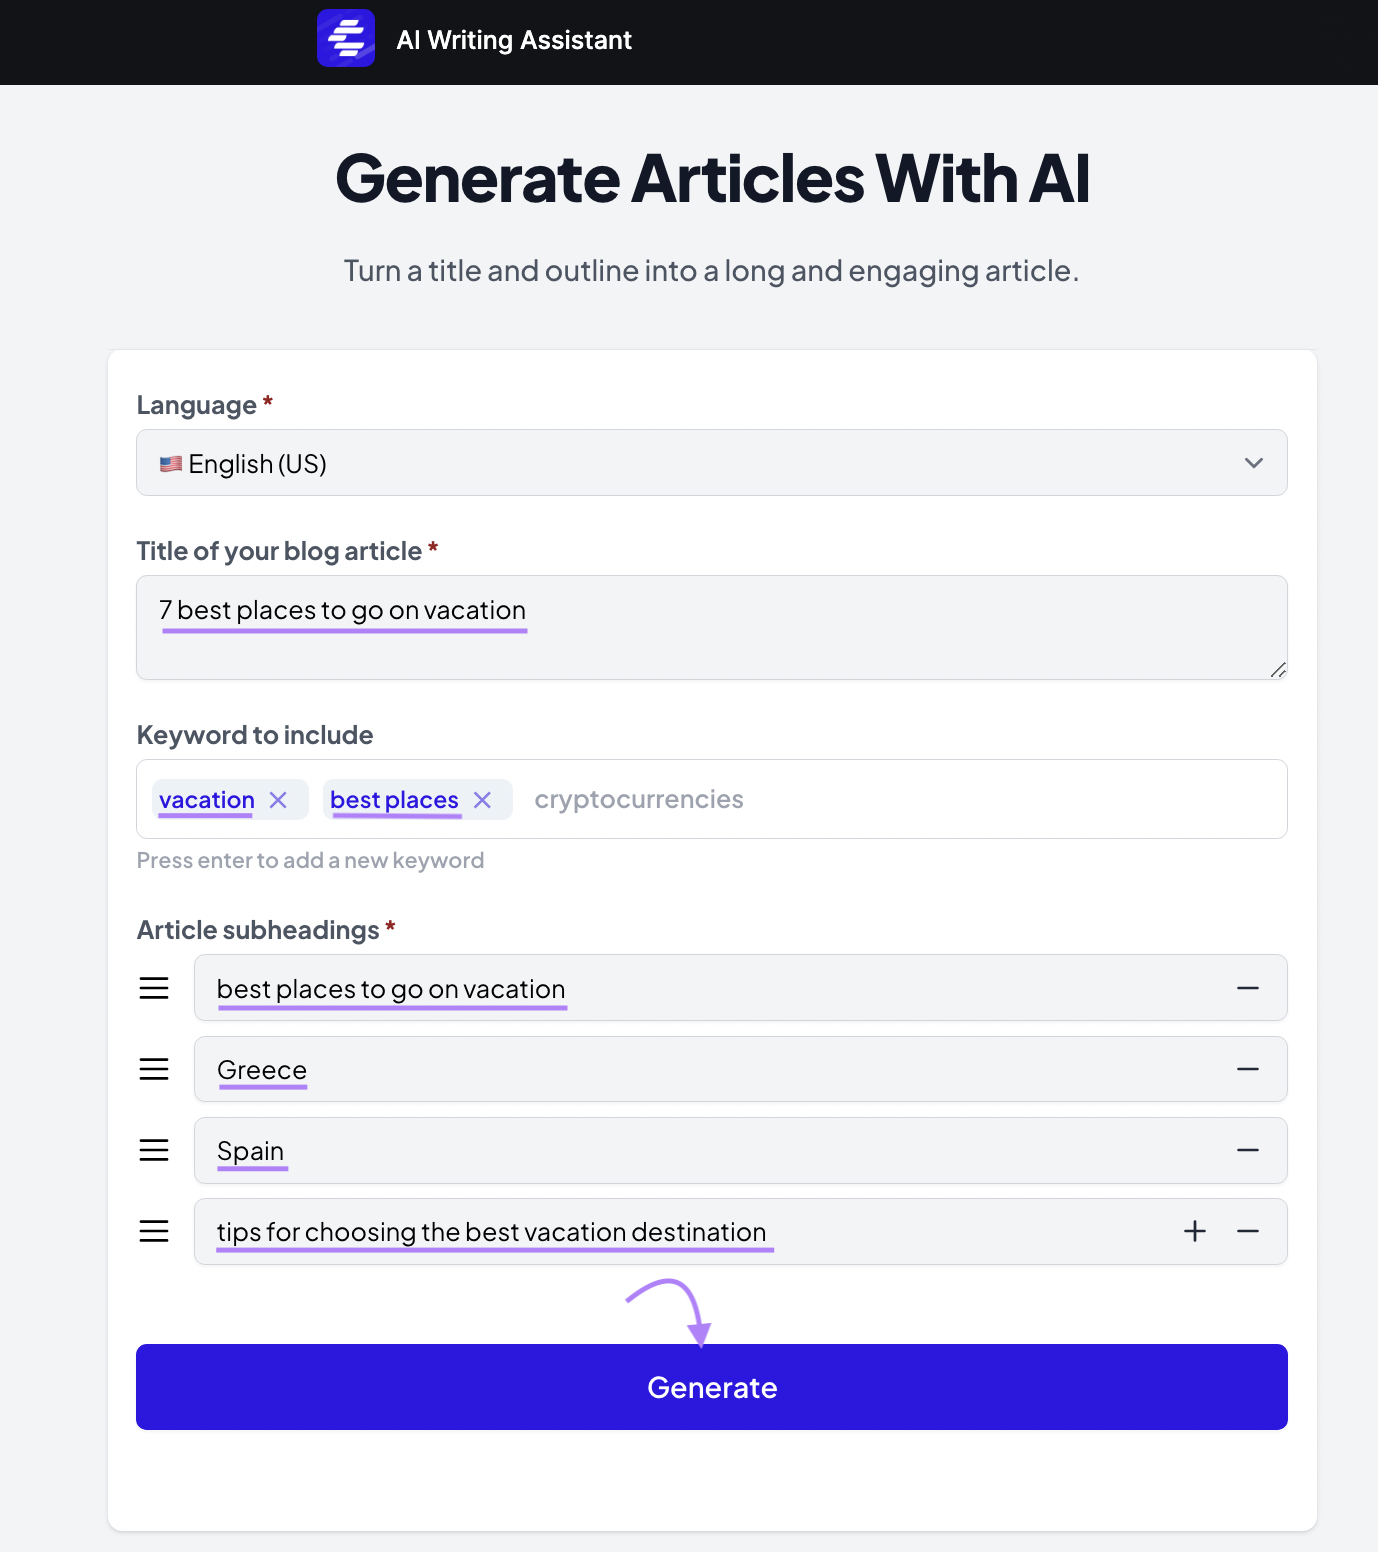 "Generate Articles with AI" configuration page